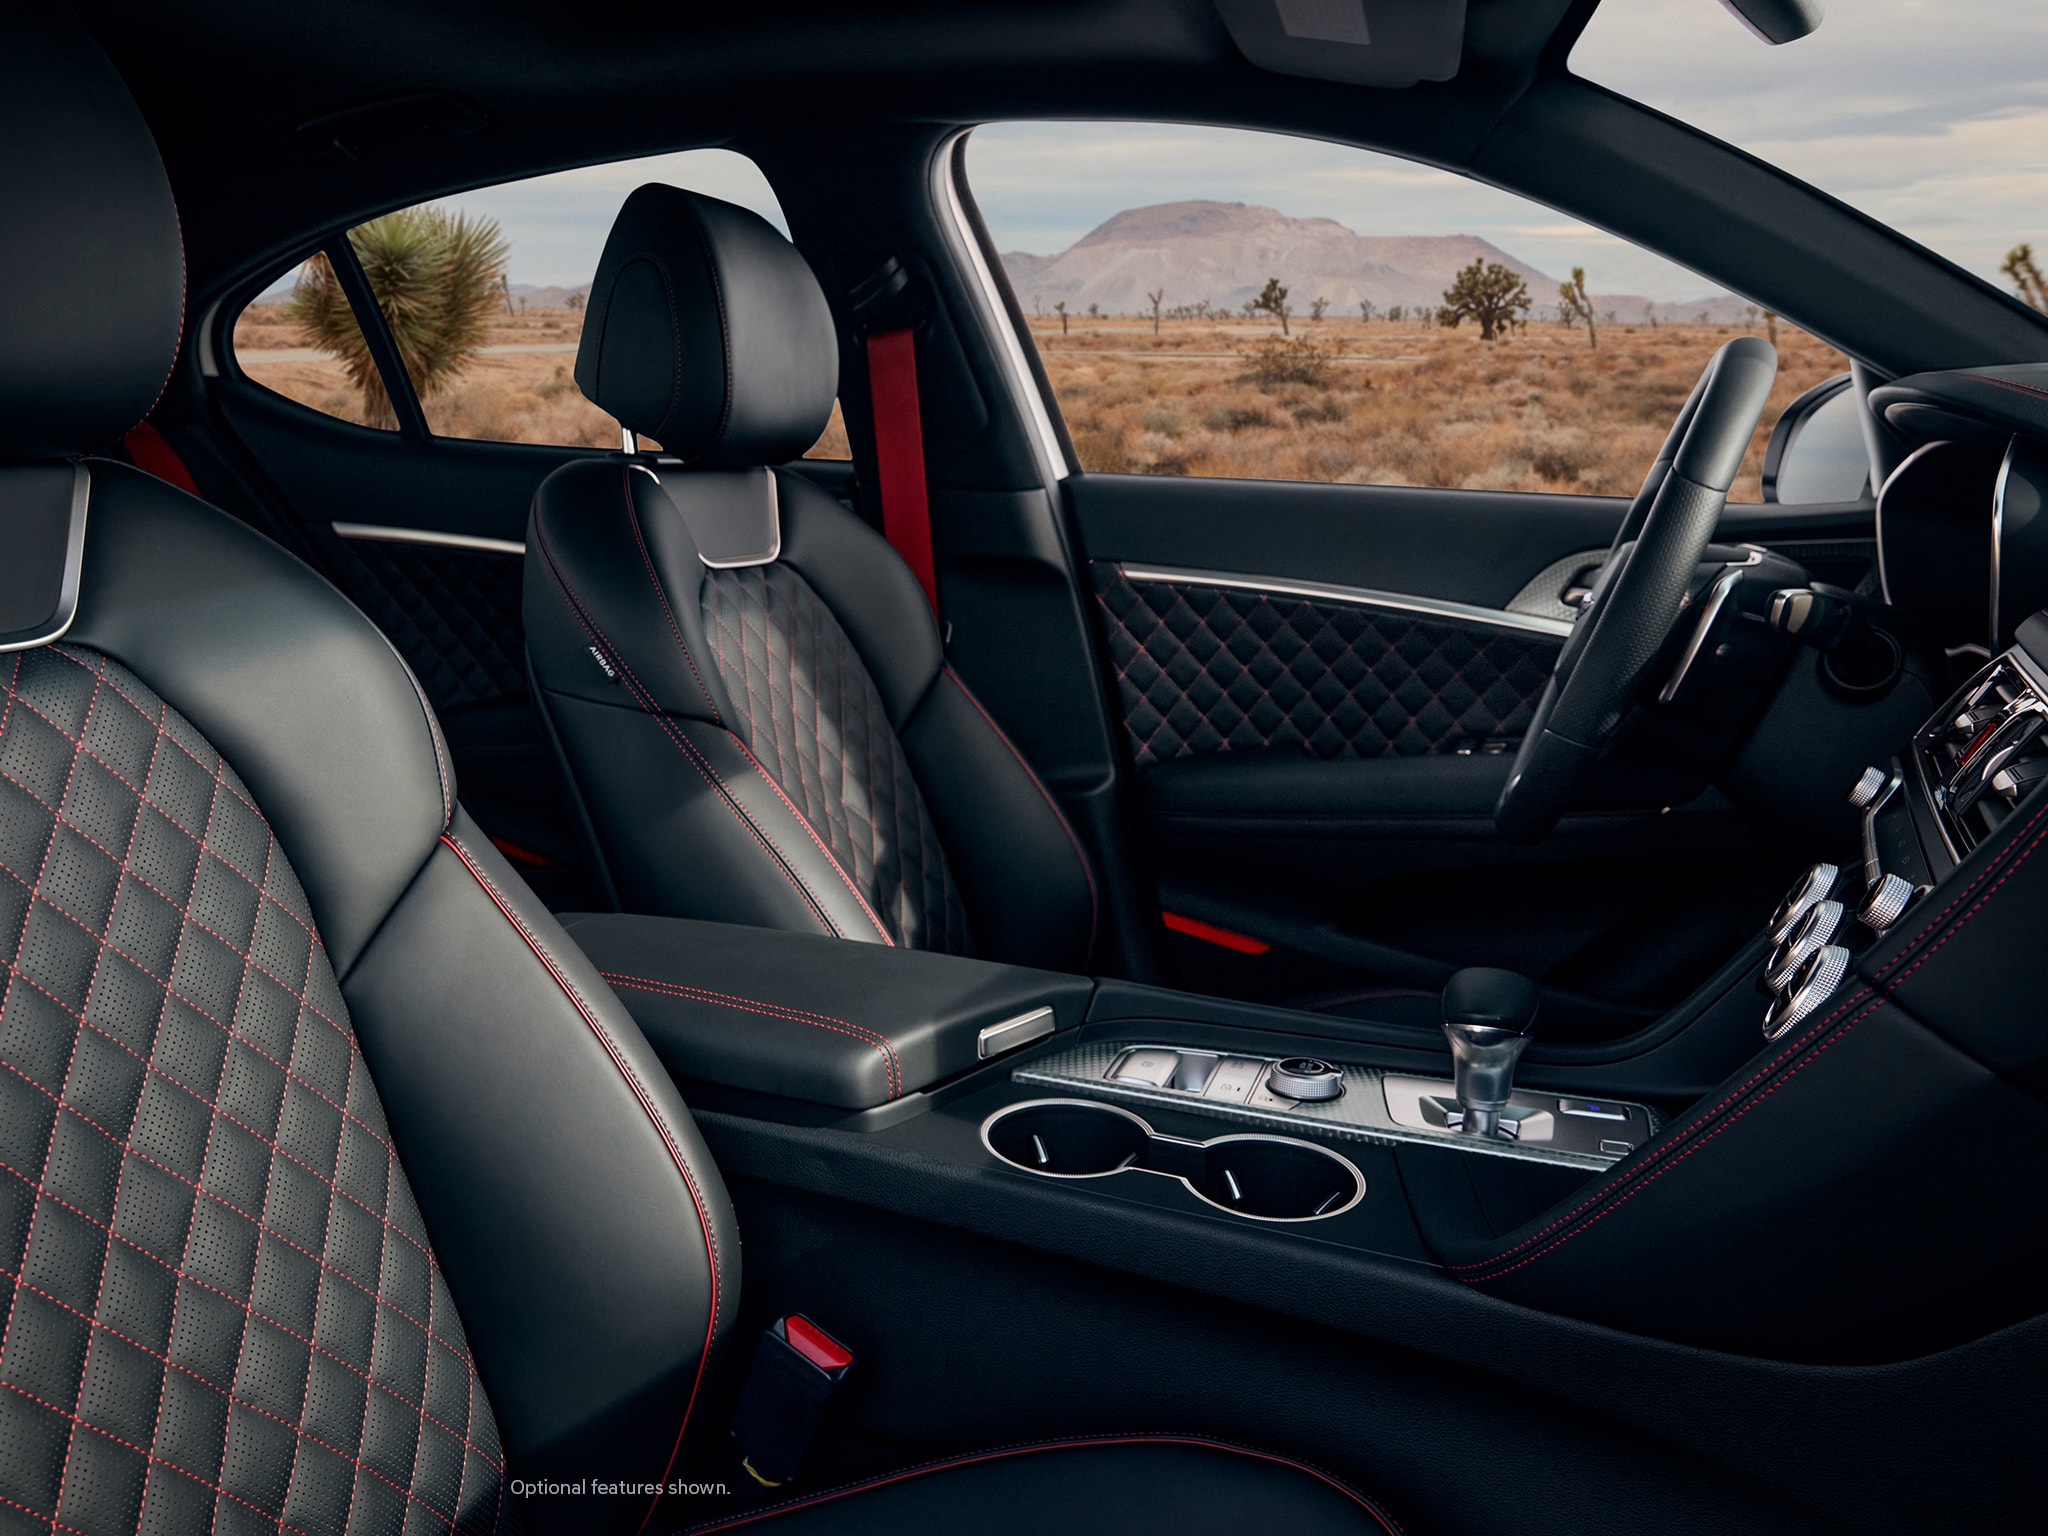 Center - 2023 Genesis G70 interior with quilted leather seats.